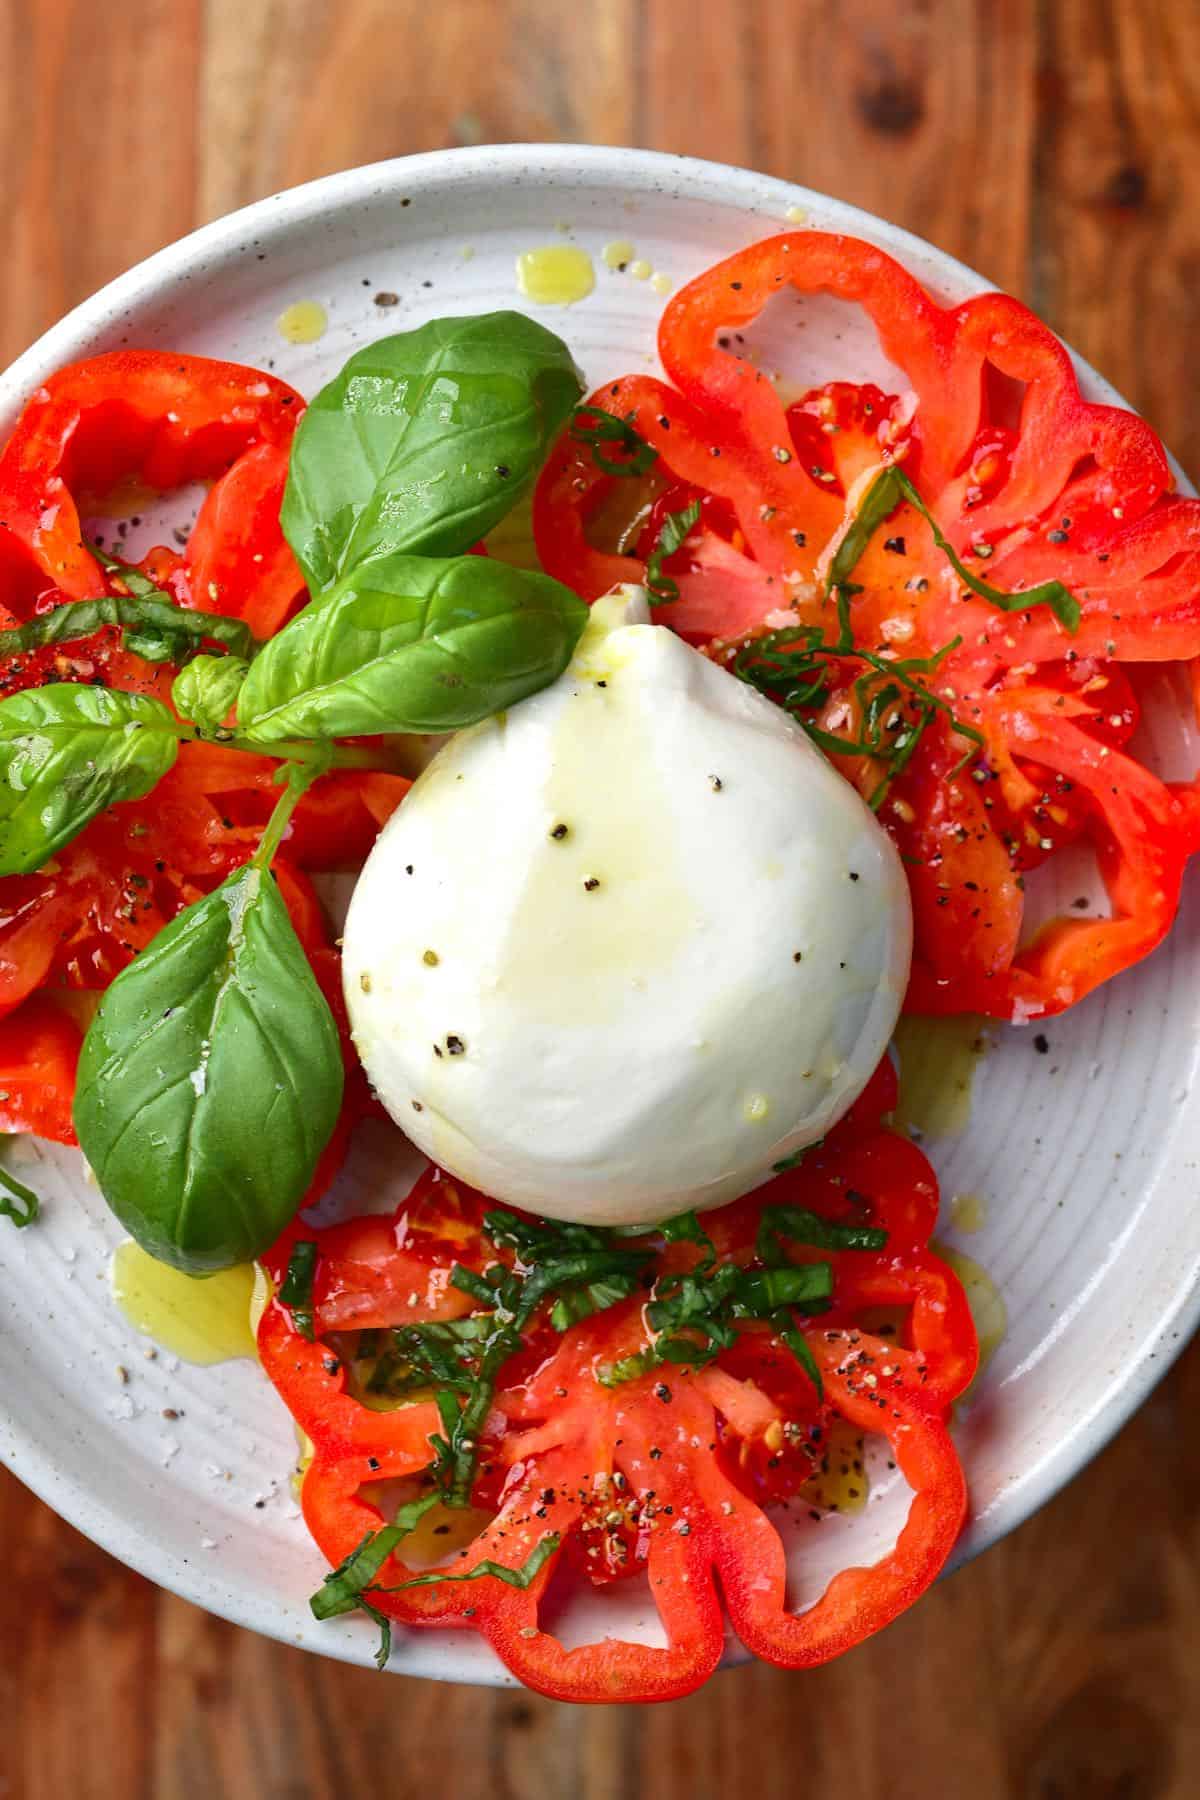 Burrata Salad with Grated Tomato And Anchovies